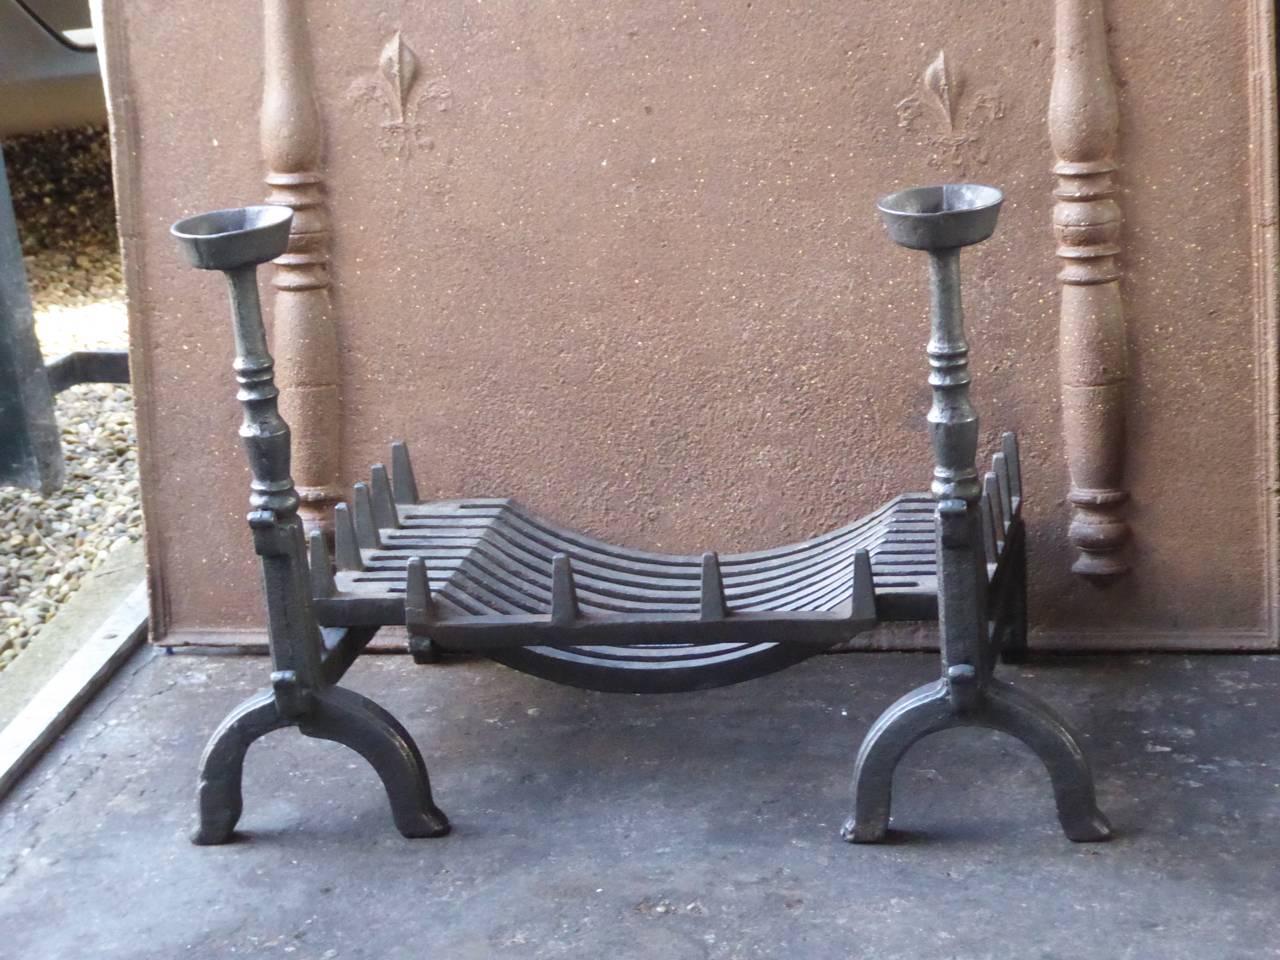 19th century English Victorian fire grate made of cast iron. The total width of the front of the grate is 81 cm.